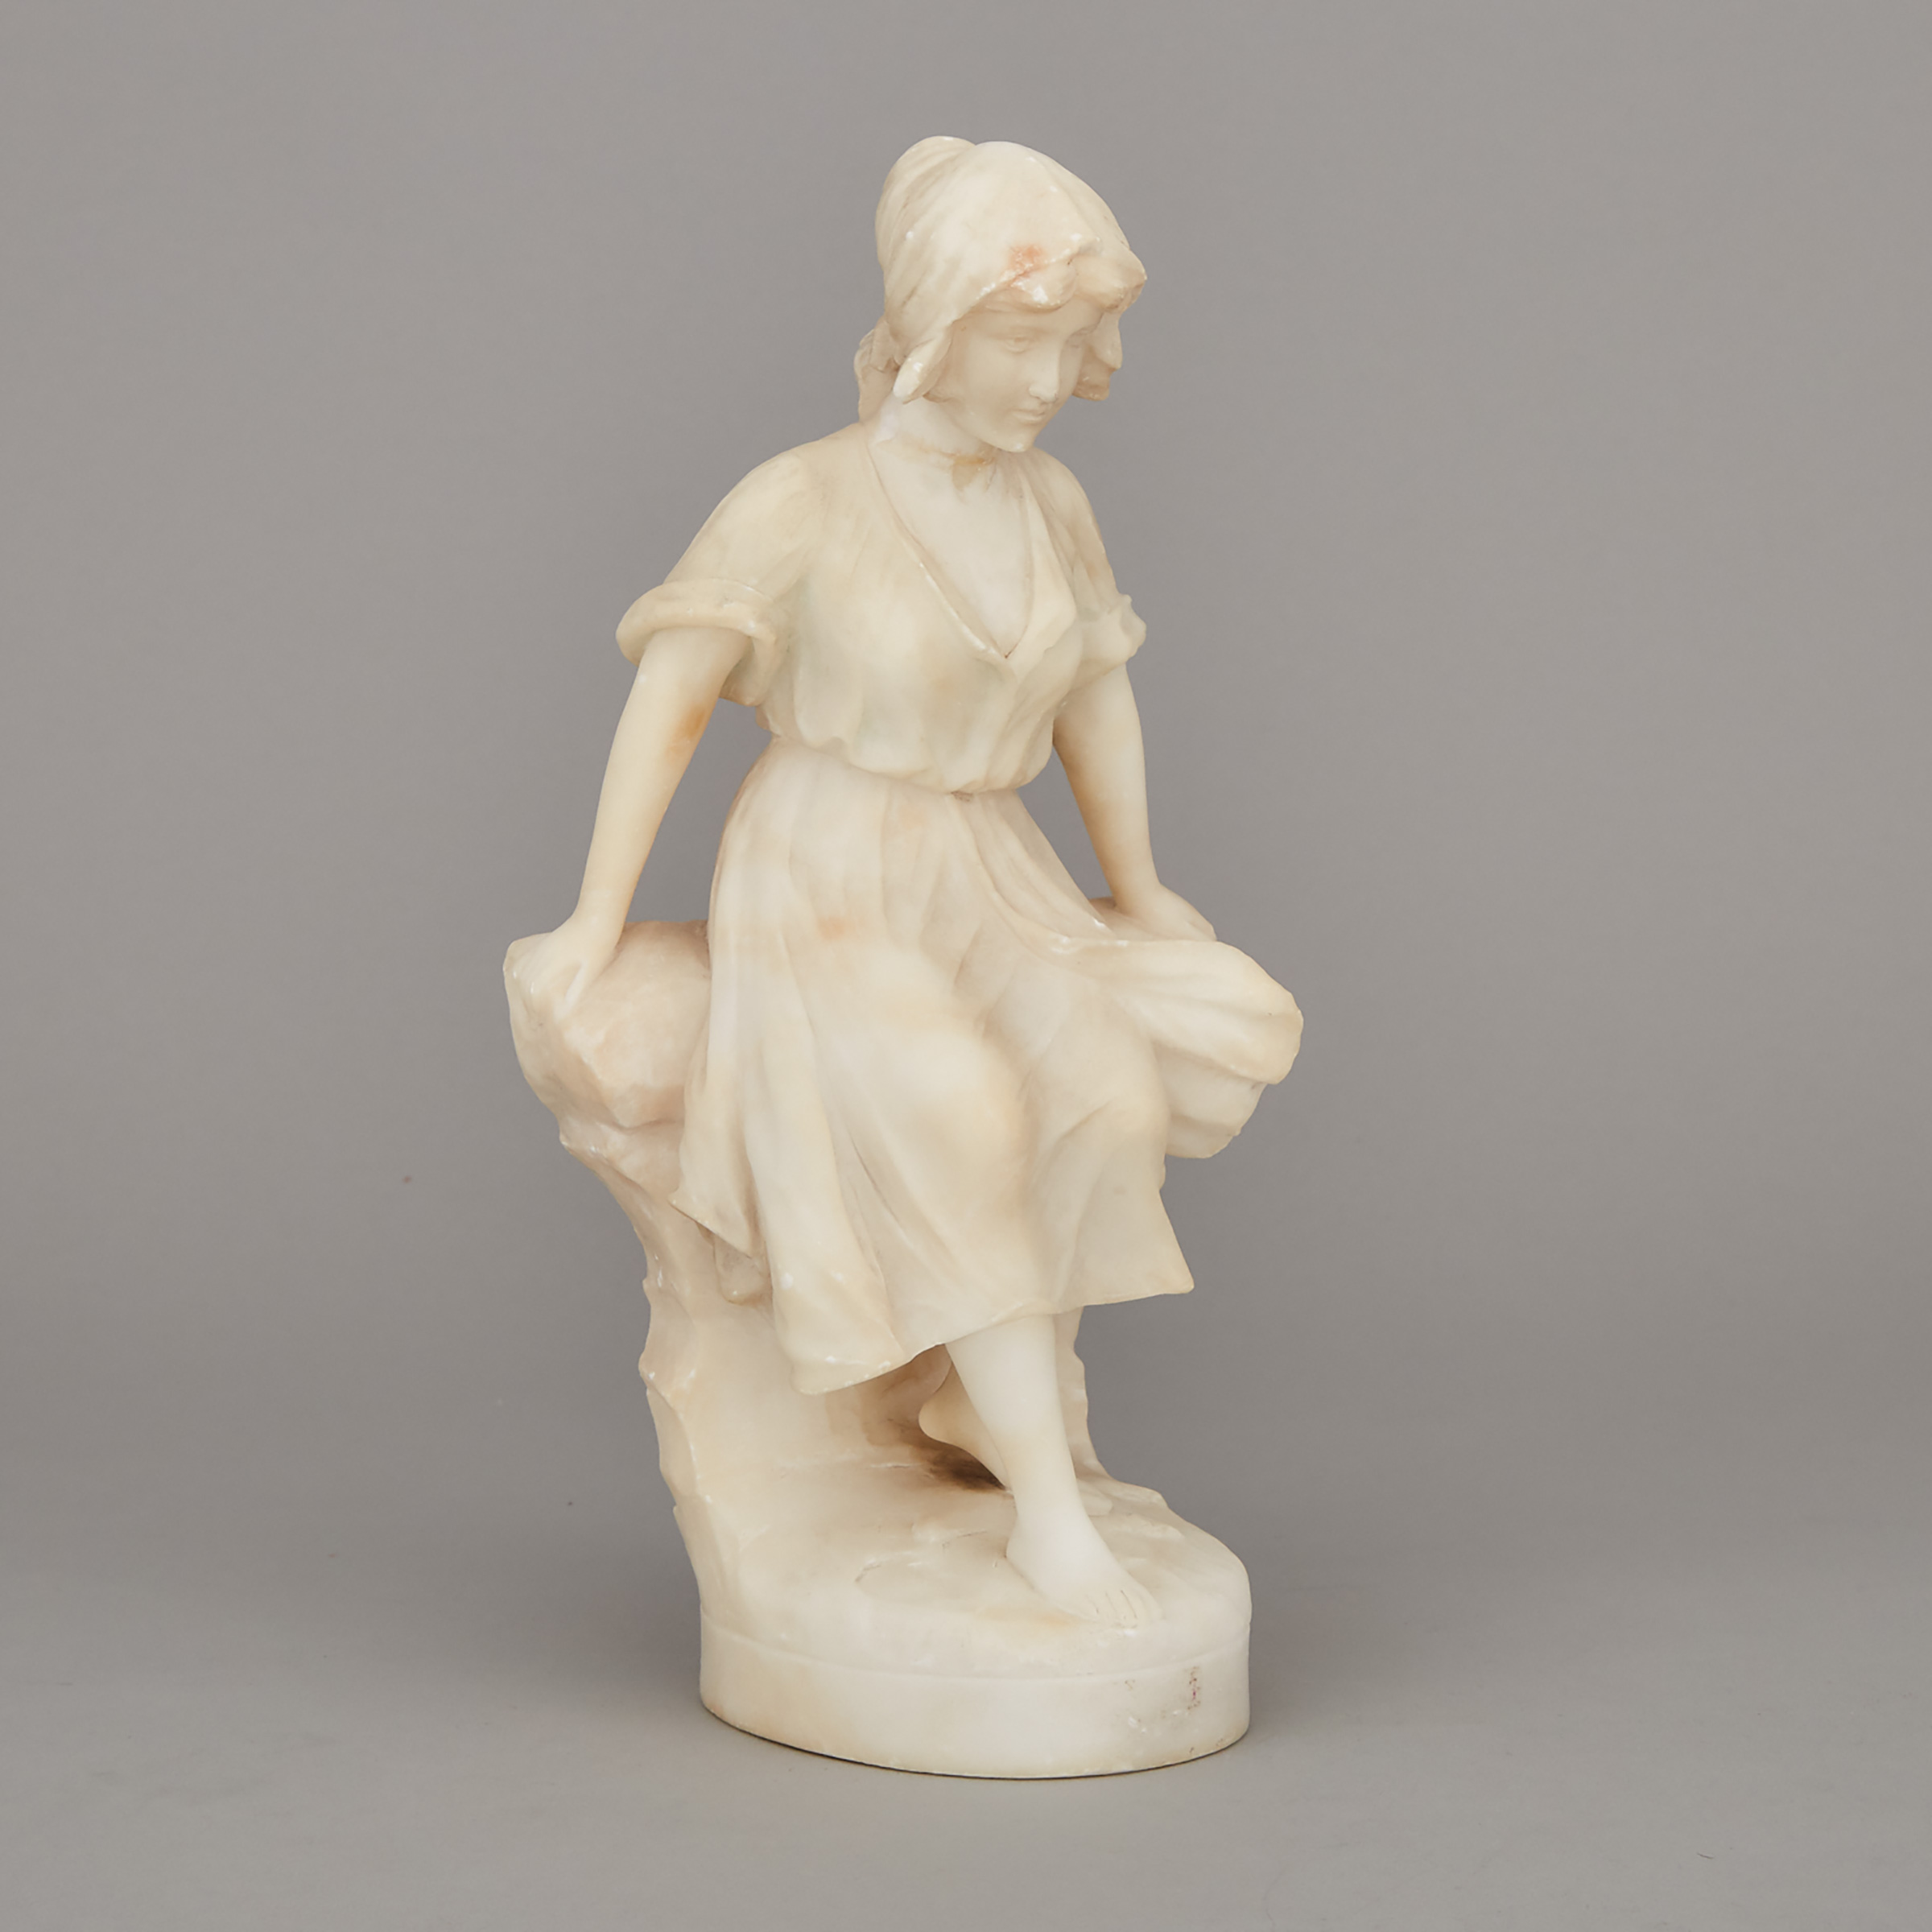 Italian School Carved Alabaster Figure of a Young Woman, early 20th century